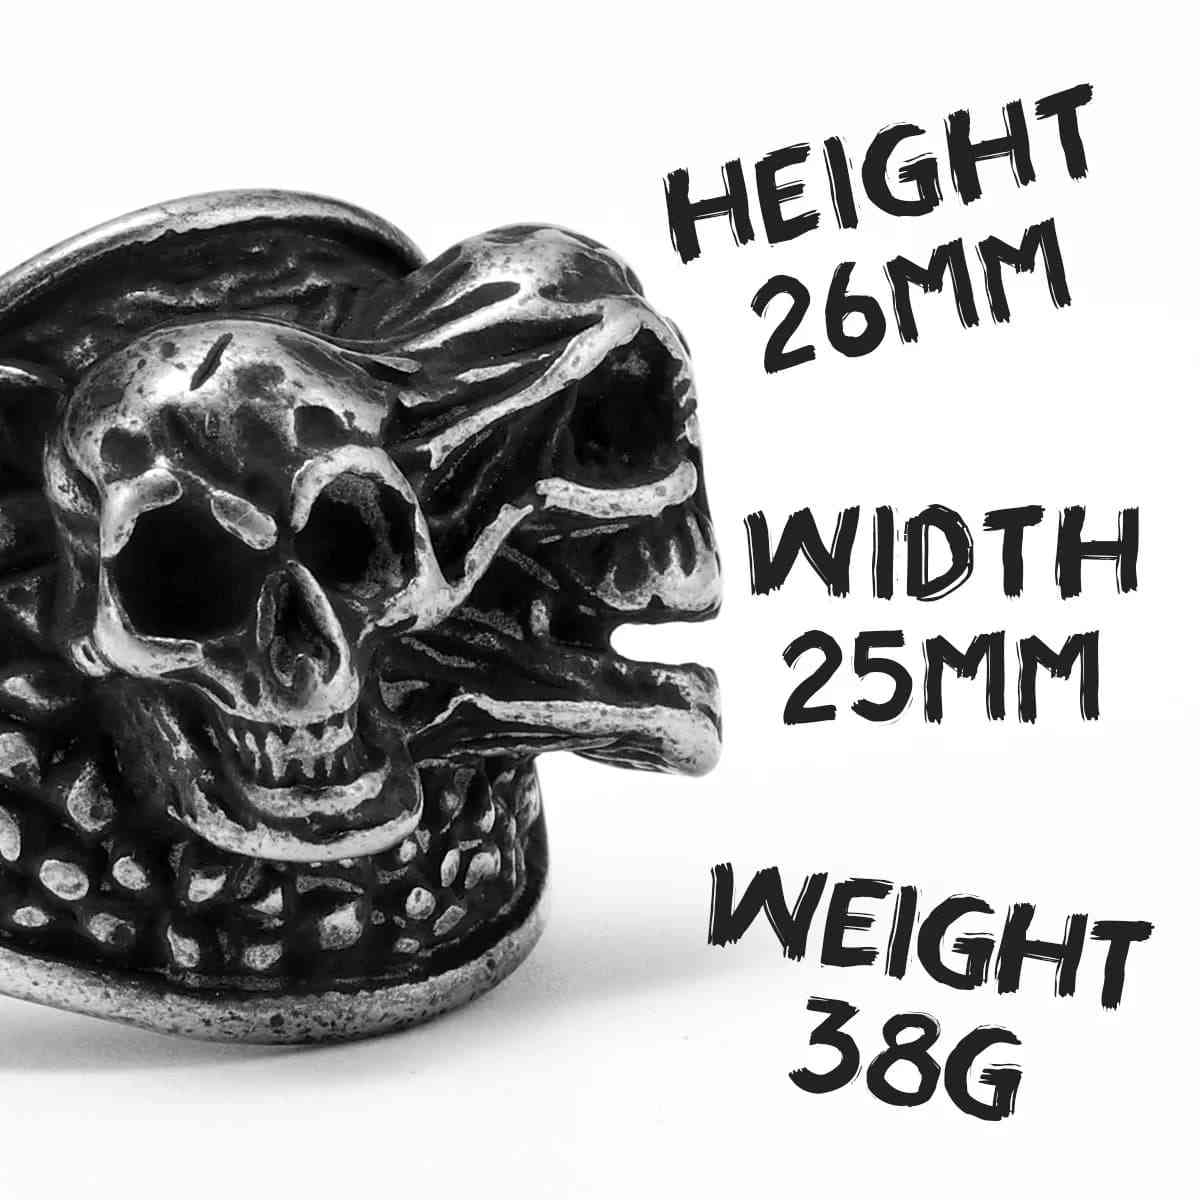 Double Headed Skull Ring Stainless Steel Xenos Jewelry